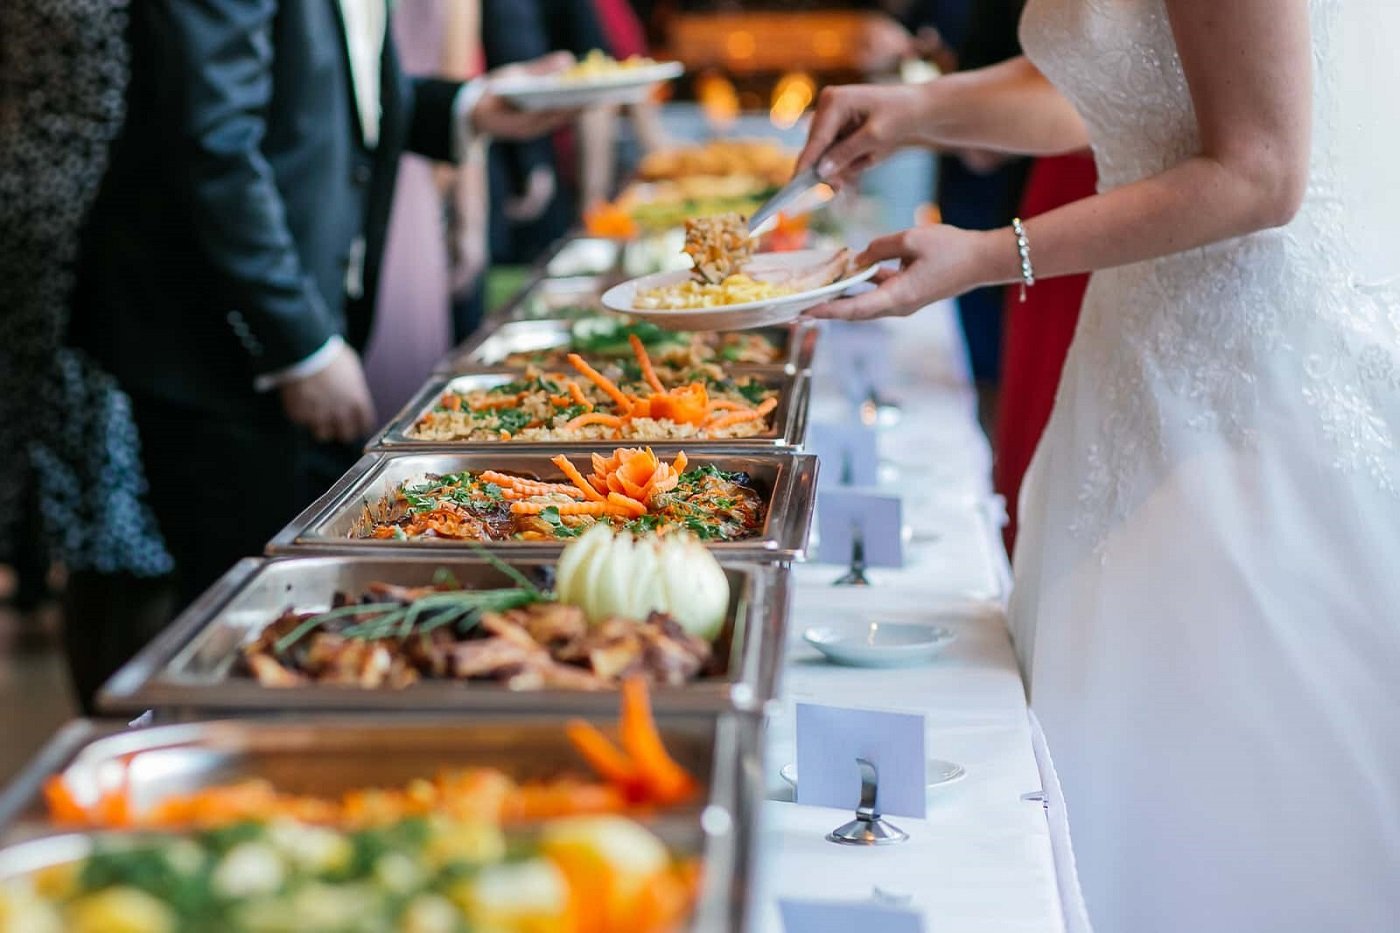 wedding catering in lahore, catering services